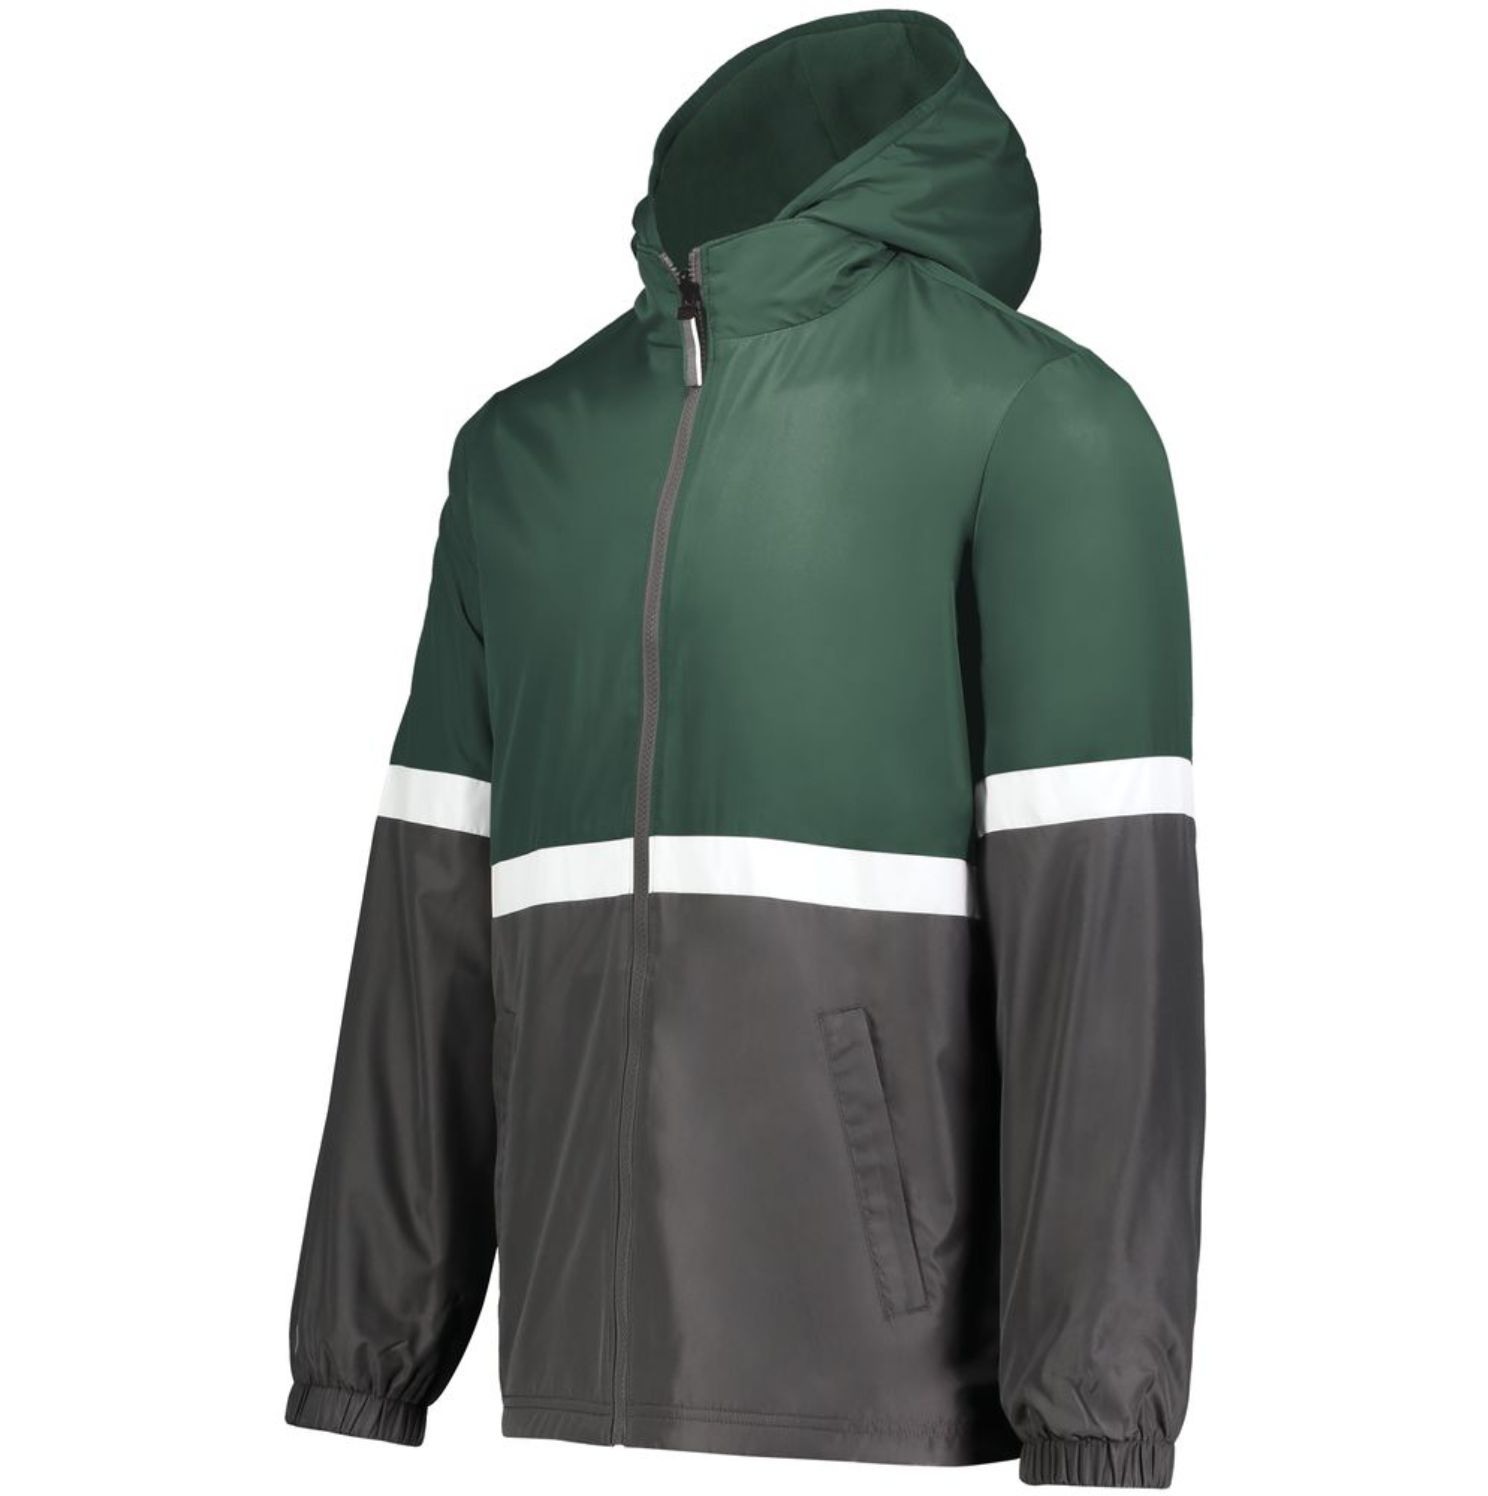 Holloway Turnabout Reversible Jacket #229587 Dark Green / Carbon